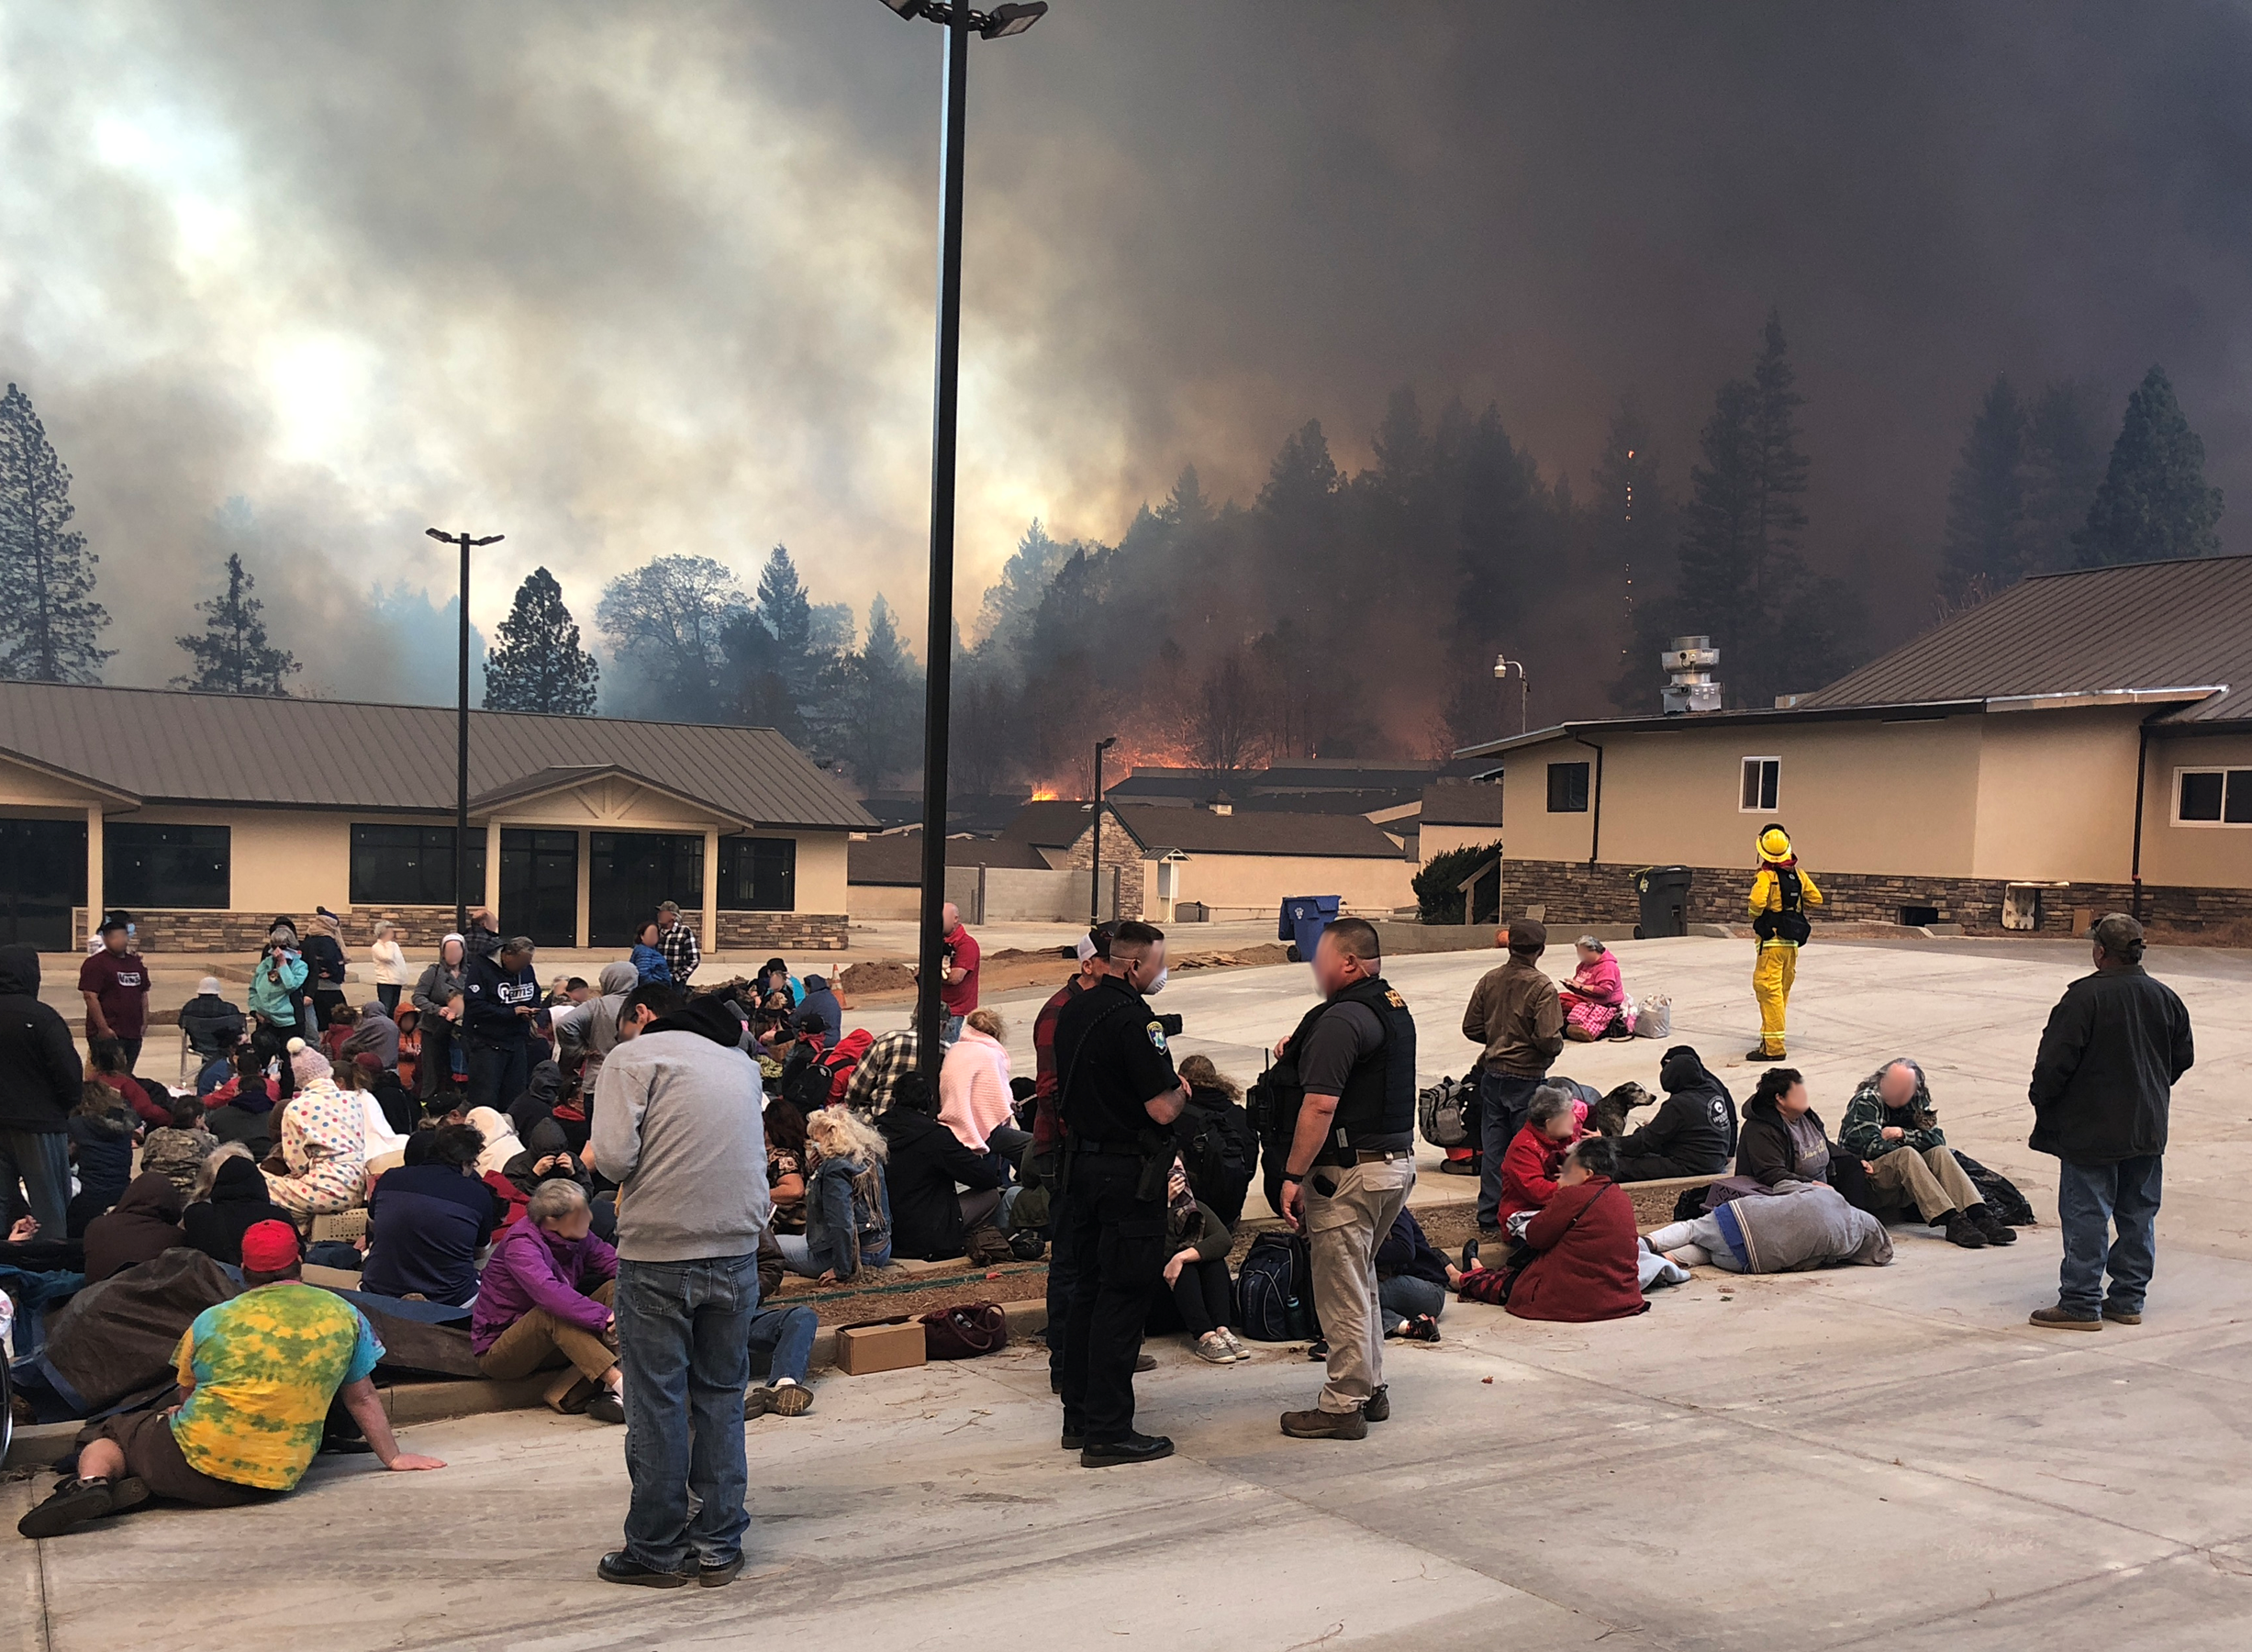 Groups of people sit or lie in a parking lot surrounded by low buildings as fires burn in the forest beyond.  